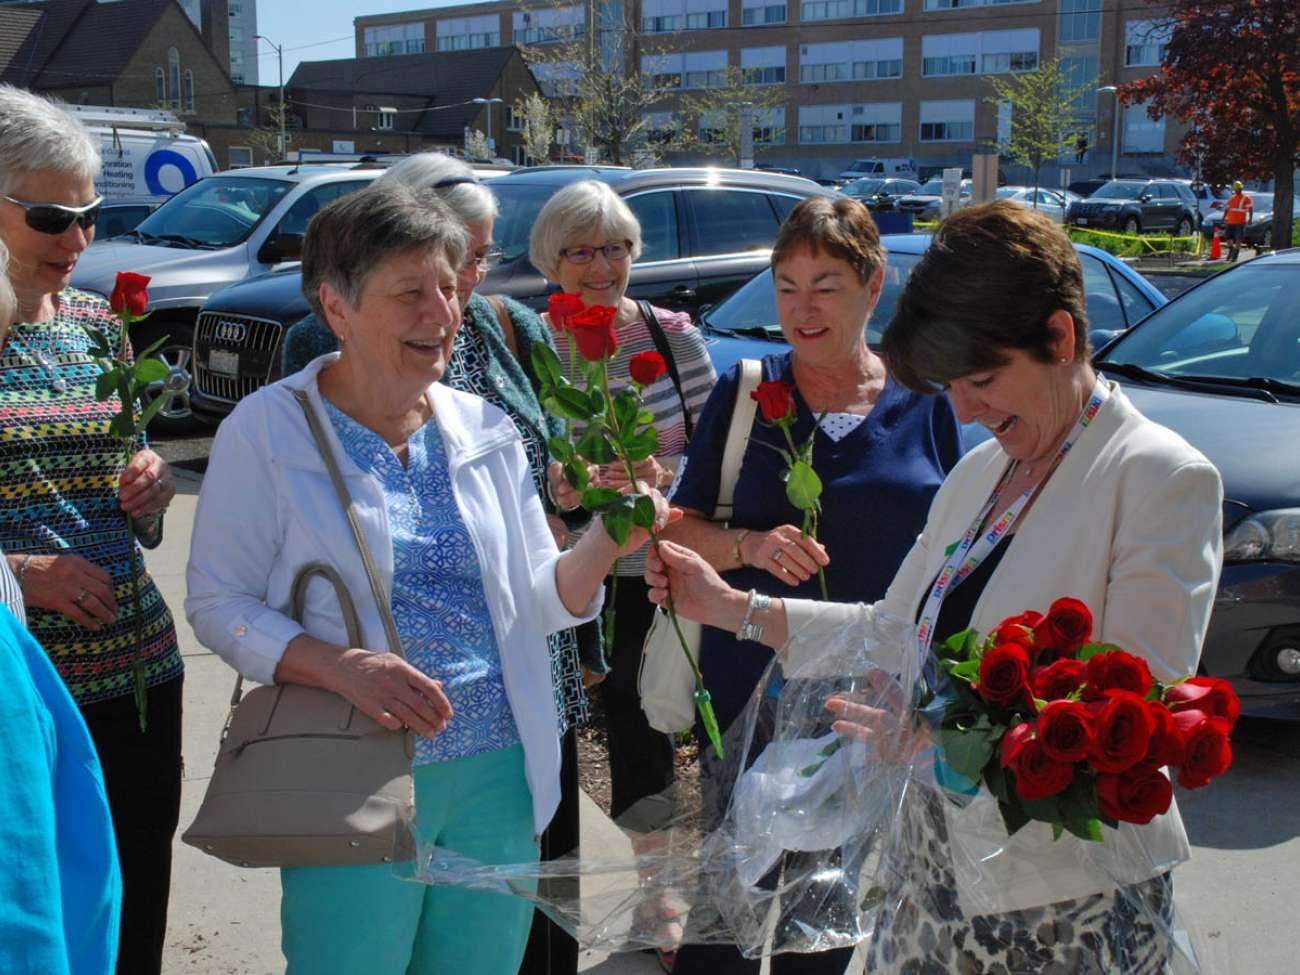 Vice president of clinical services and chief nursing executive Judy Linton greeted each tour participant with a rose.